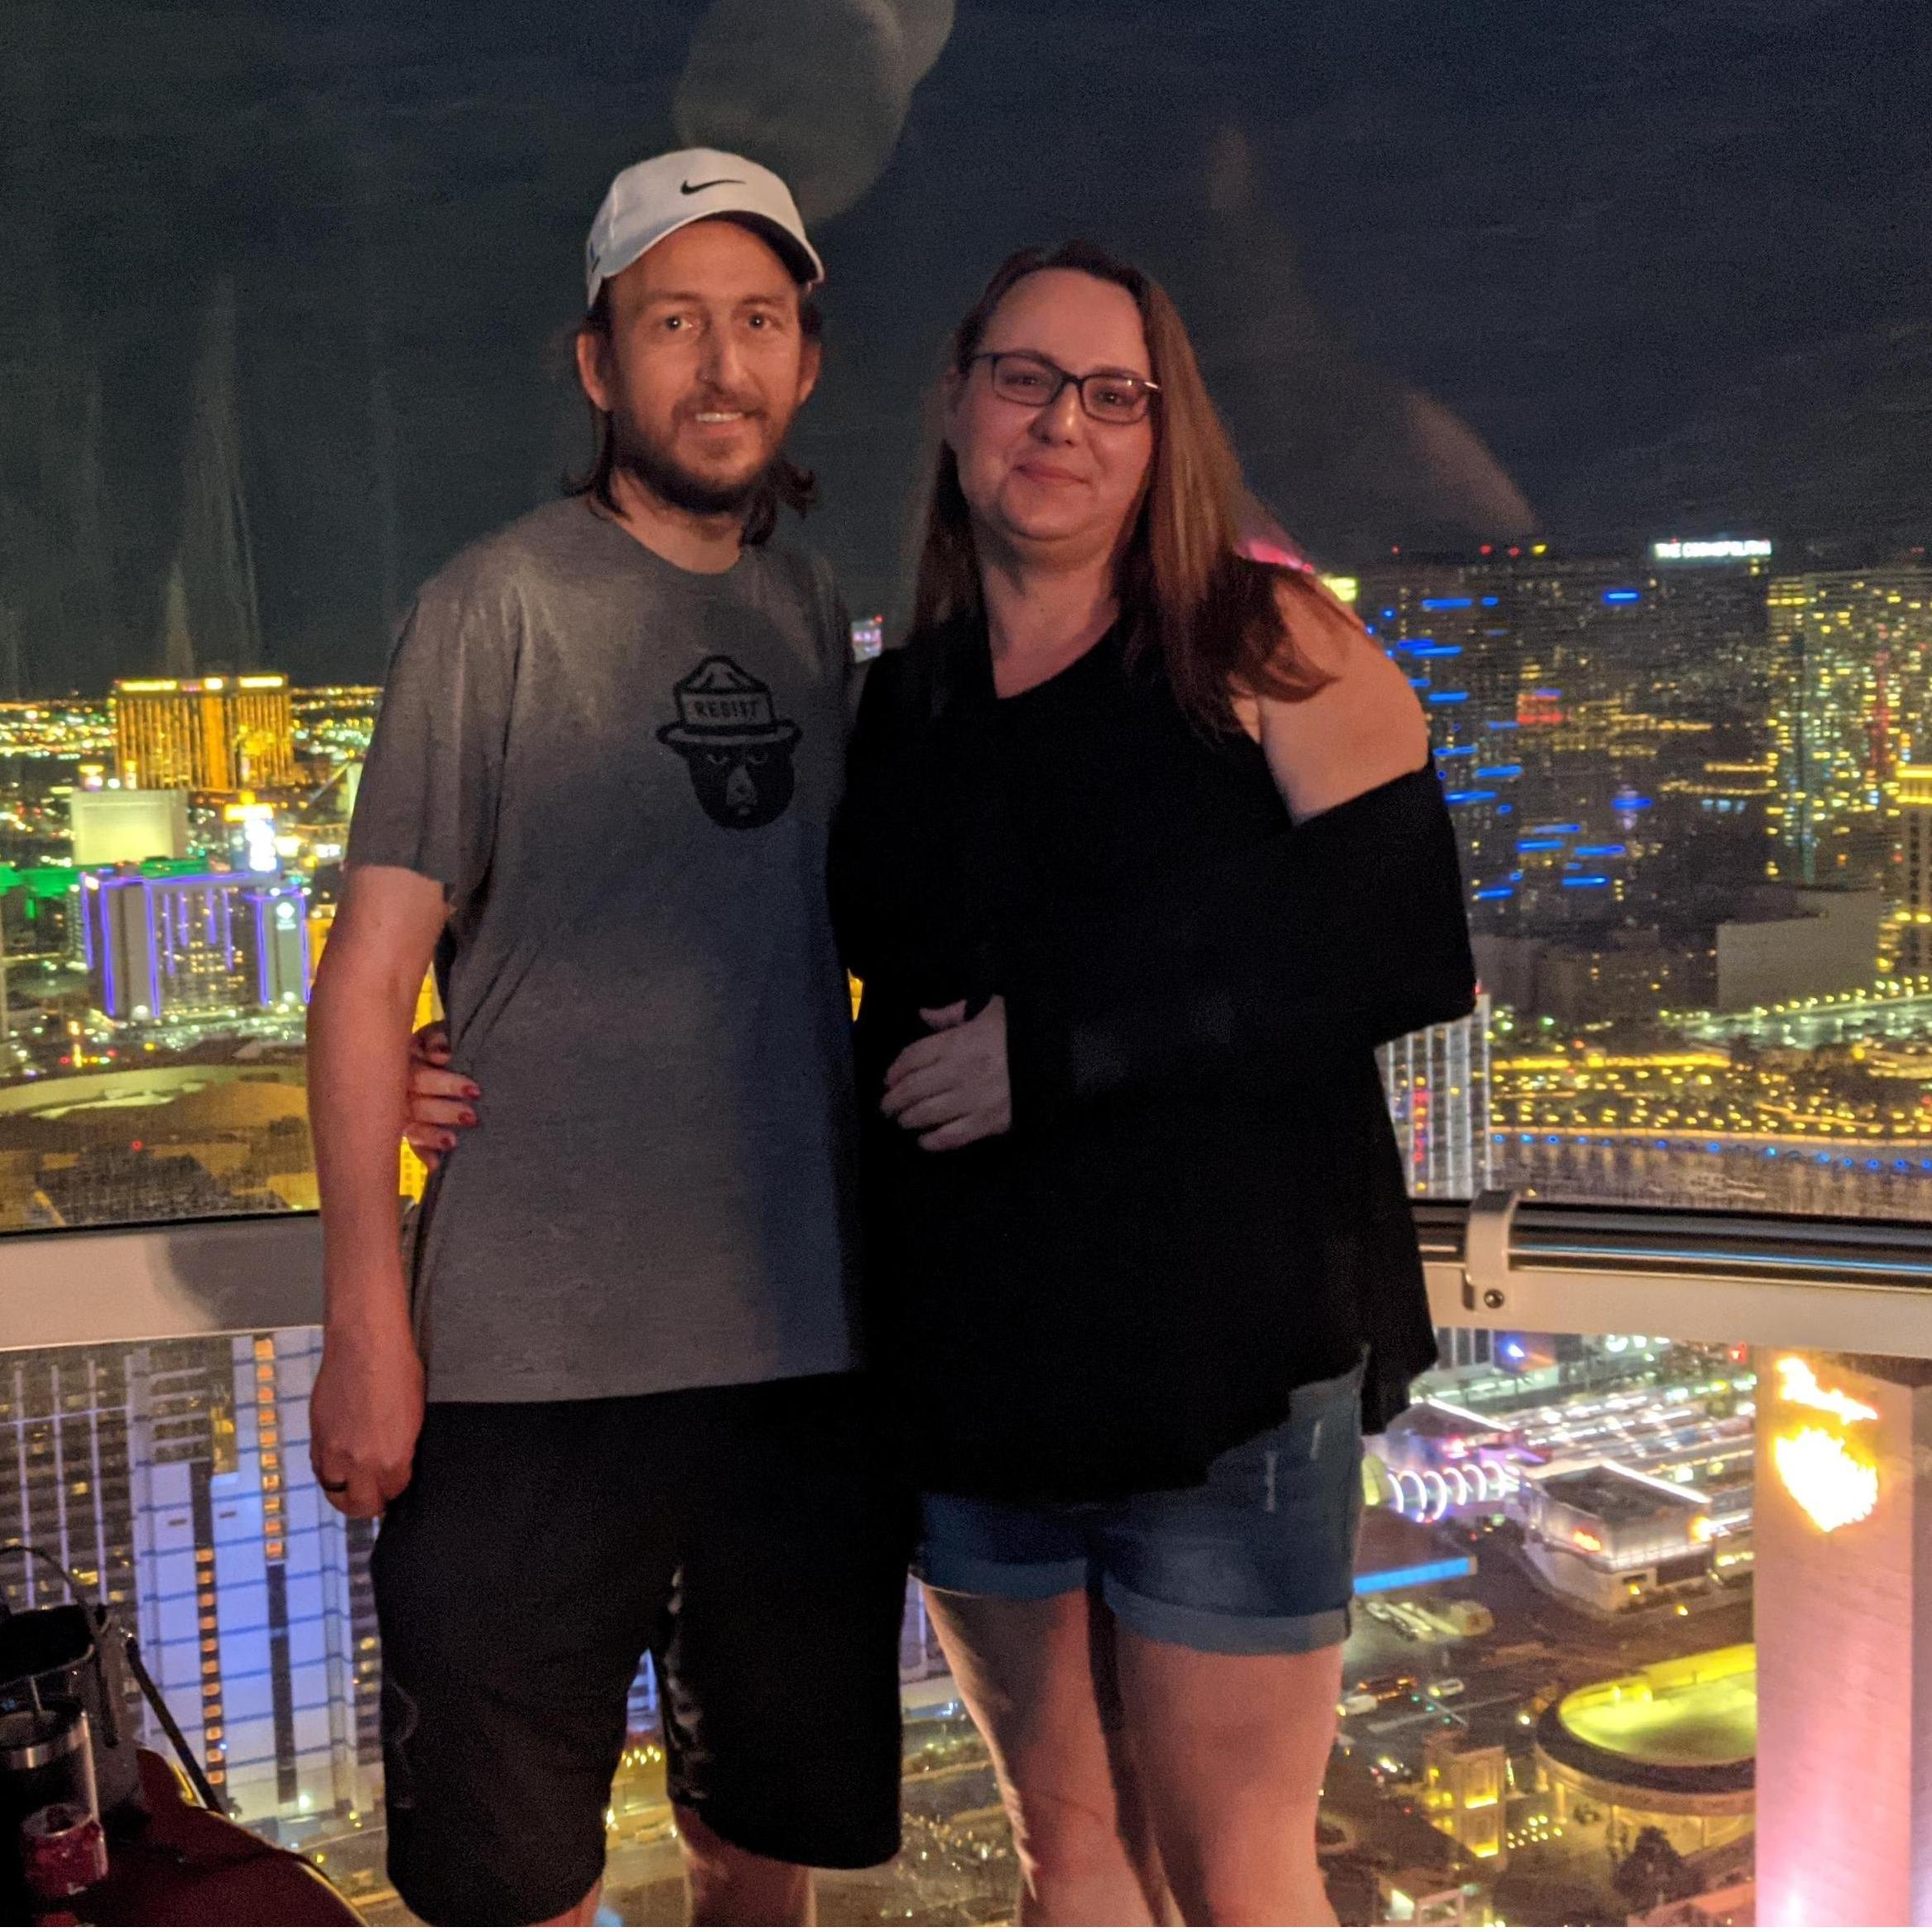 Us in Vegas on the High Roller